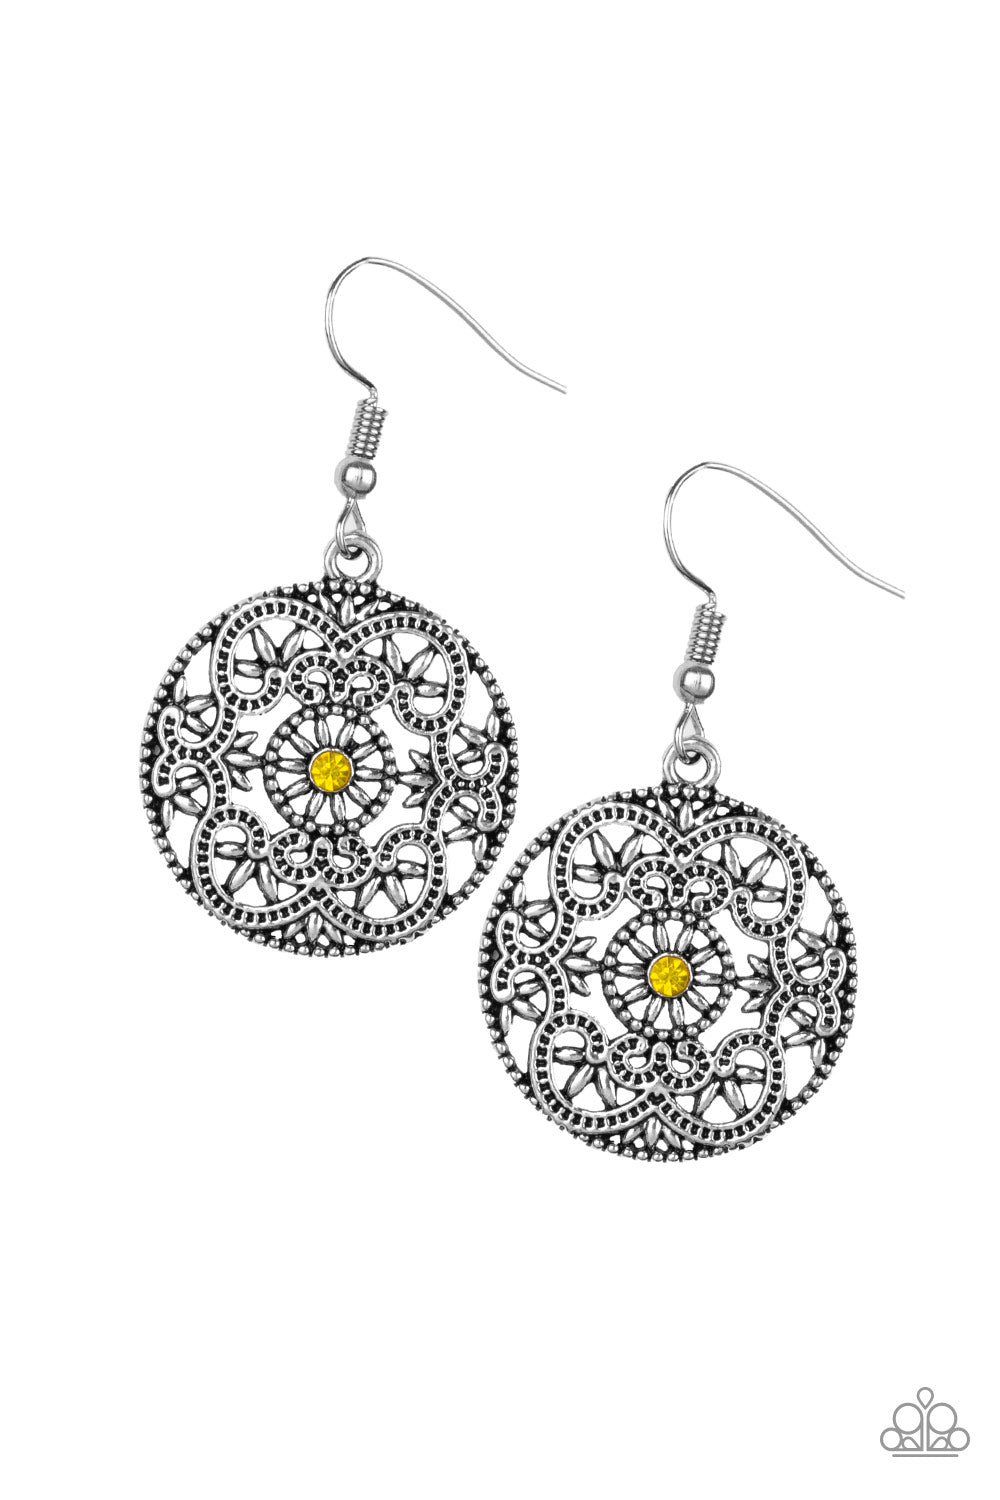 Paparazzi Accessories - Rochester Royale - Yellow Earrings - Alies Bling Bar